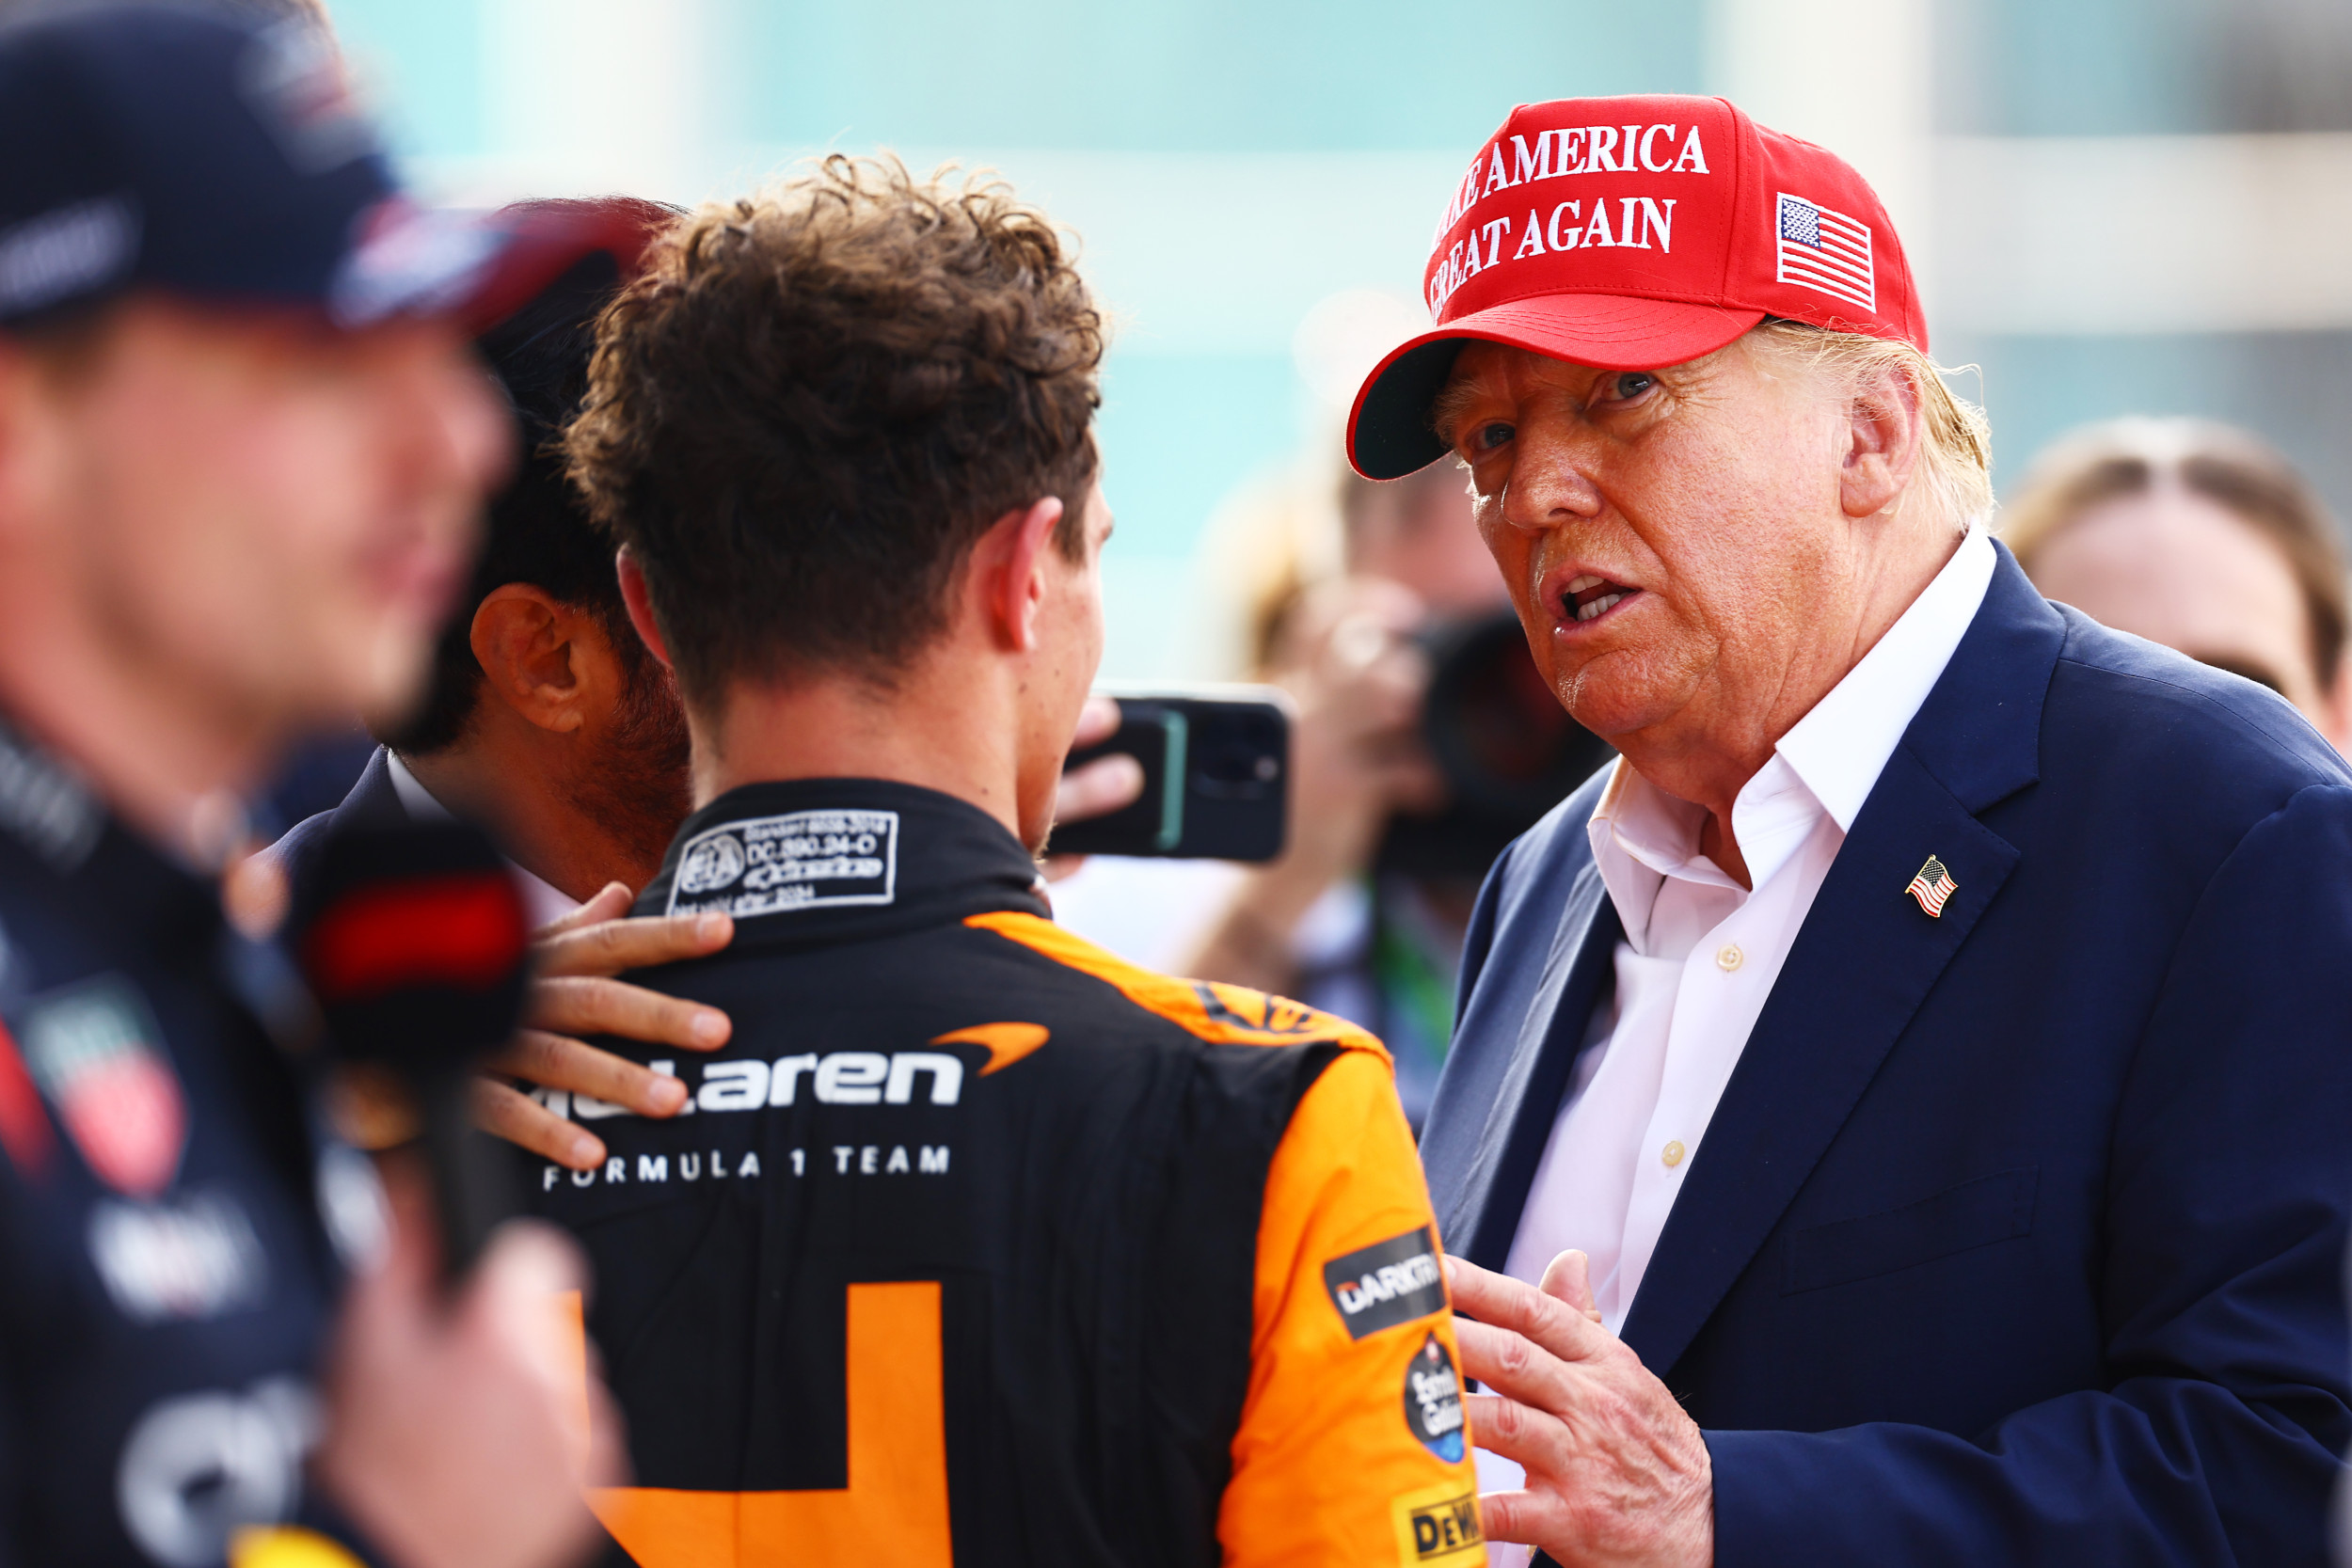 Trump Makes Appearance at Miami Grand Prix as Guest of McLaren